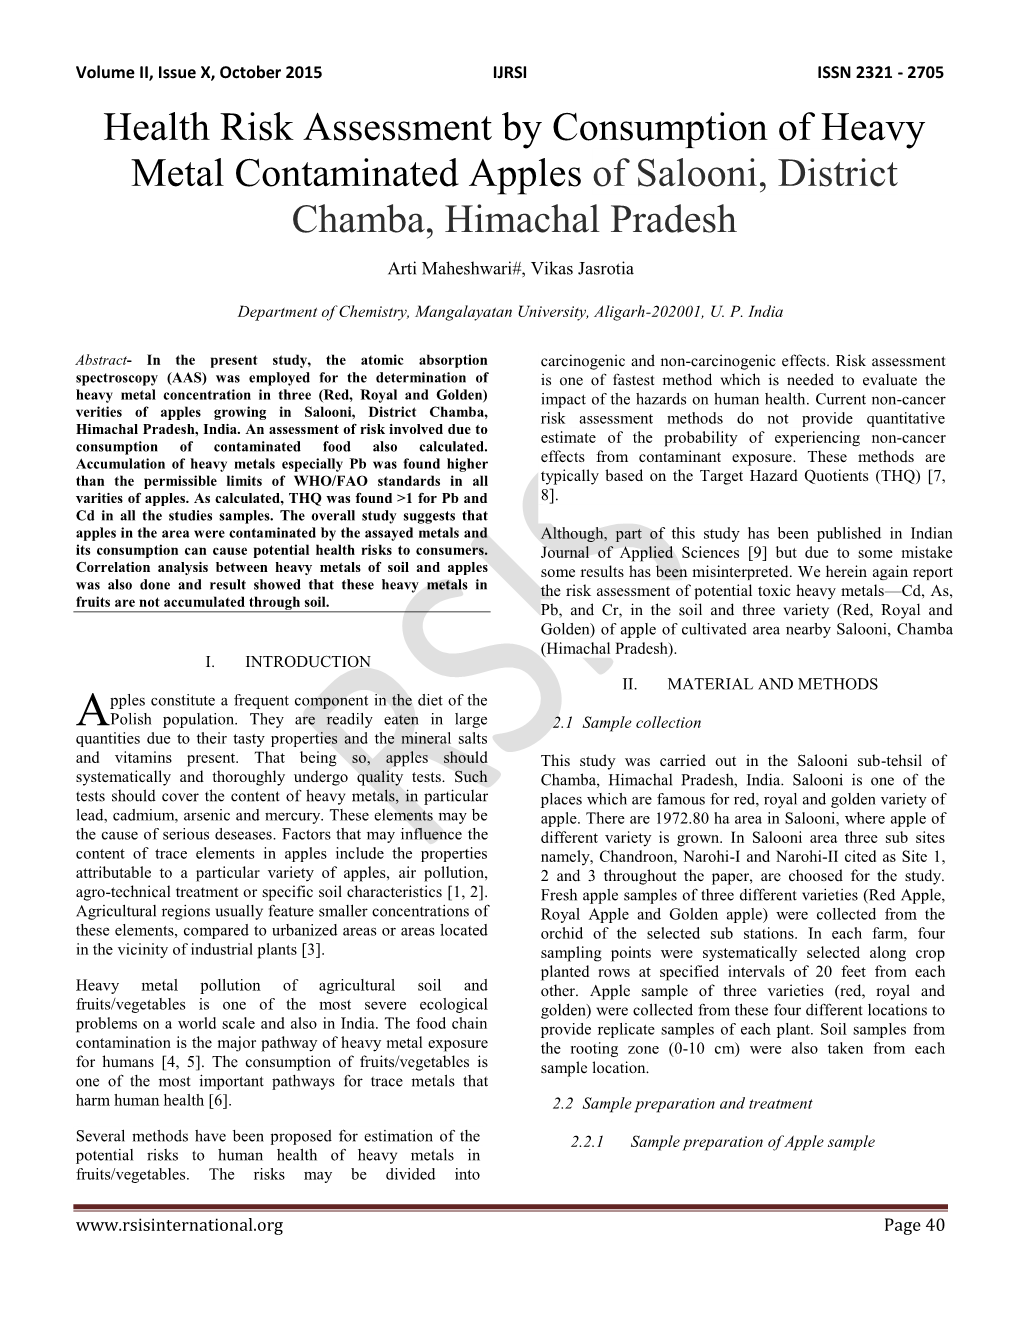 Health Risk Assessment by Consumption of Heavy Metal Contaminated Apples of Salooni, District Chamba, Himachal Pradesh